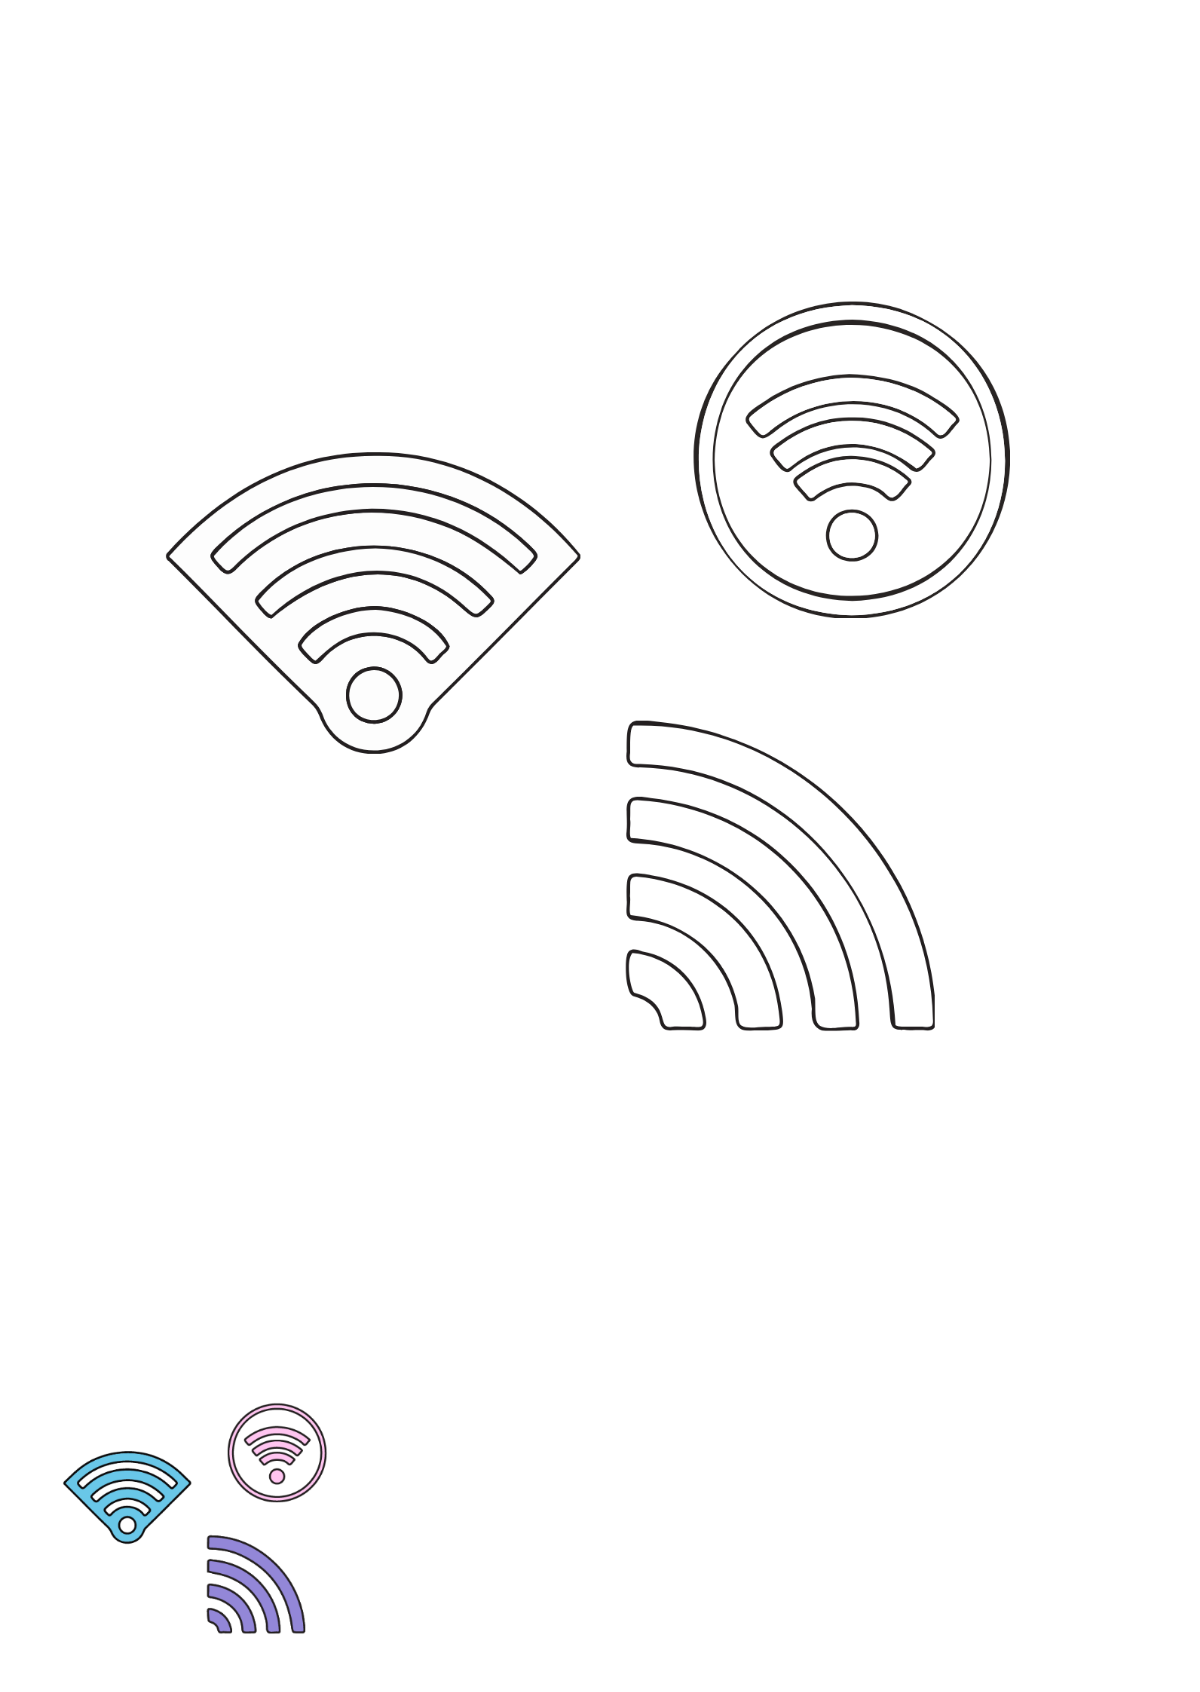 Wifi Waves coloring page Template